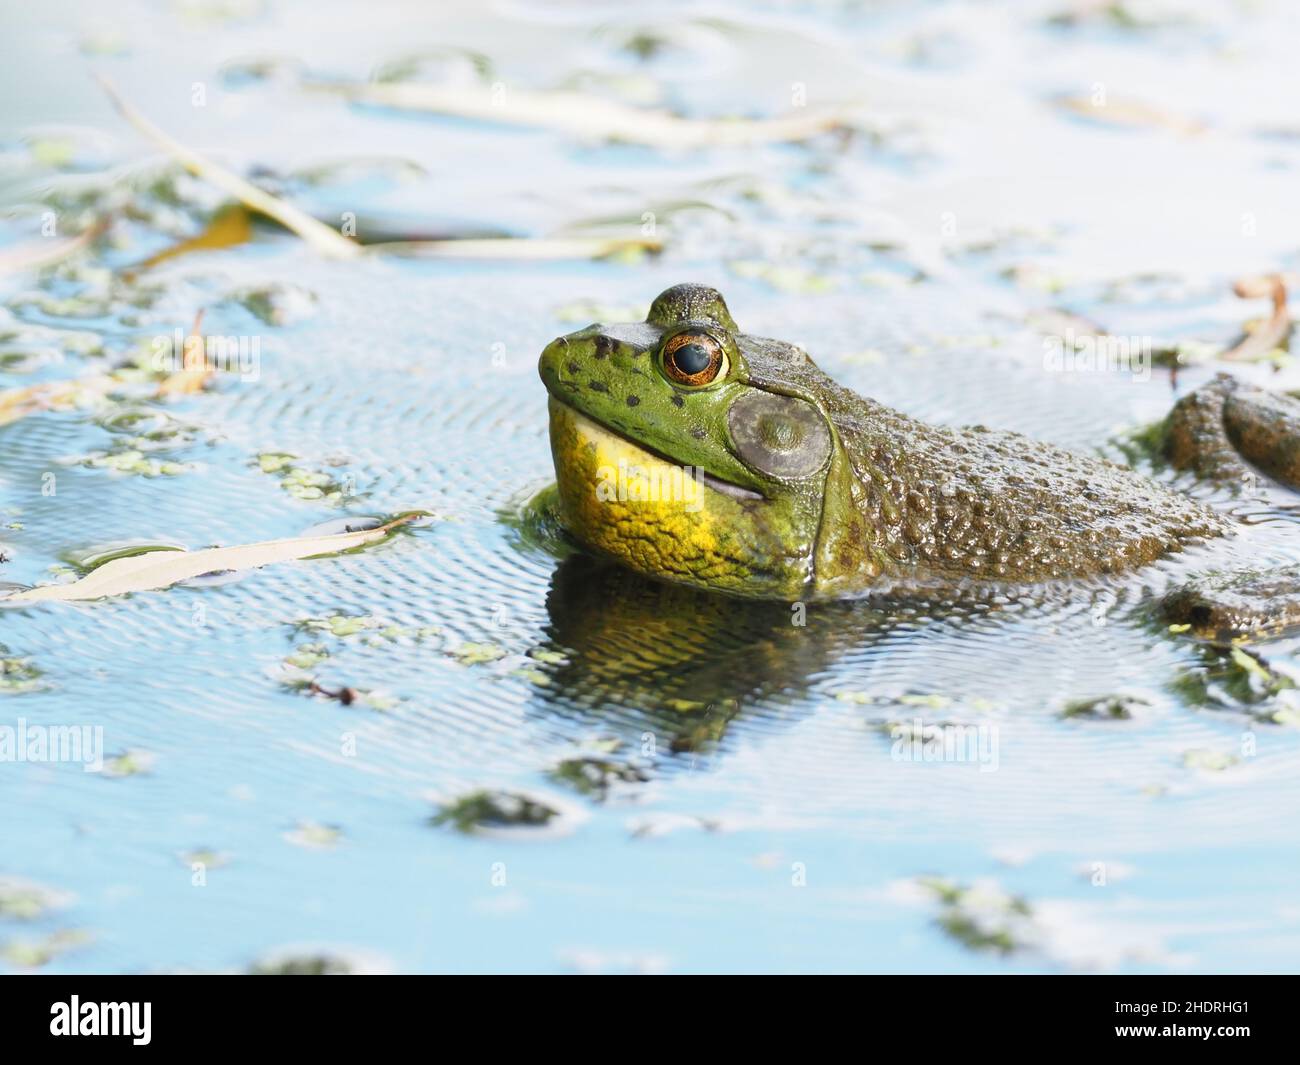 An American Bullfrog croaking in a pond or lake with ripples on the water surface from the sound's vibration. Stock Photo